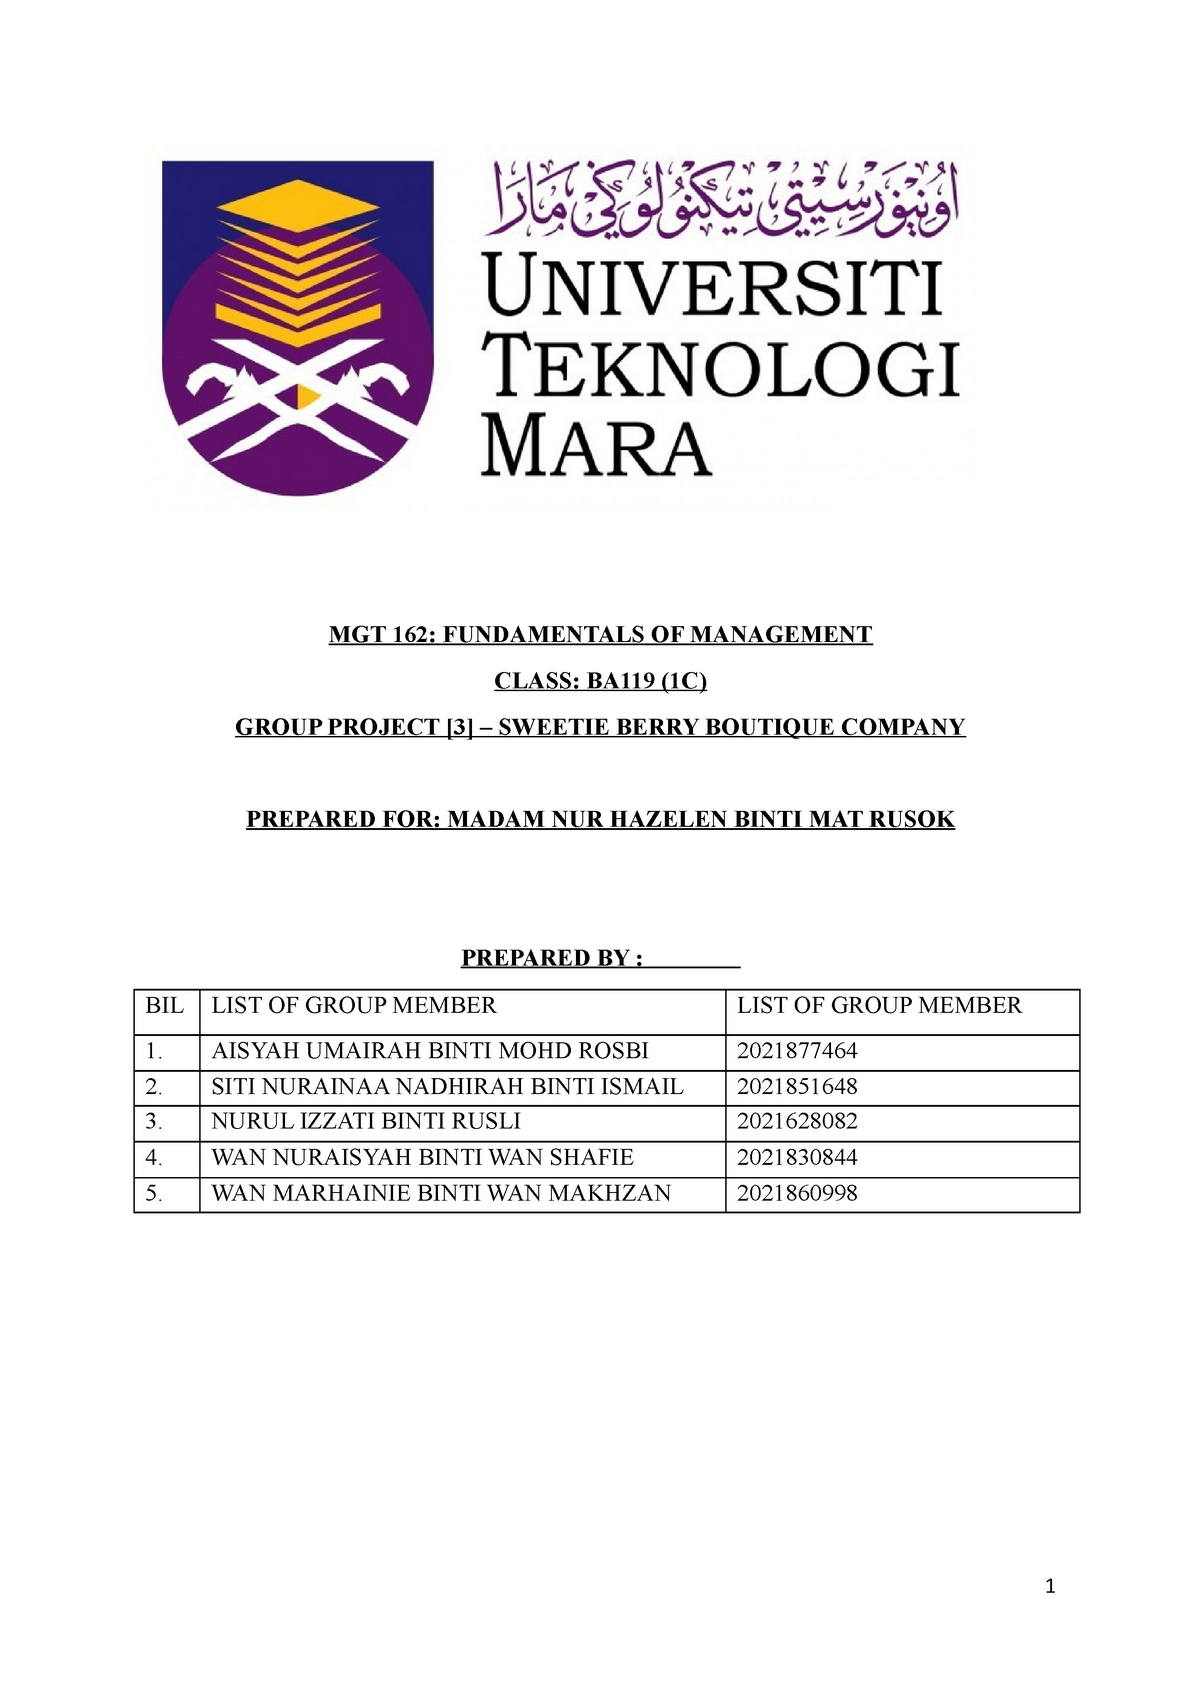 contoh group assignment mgt162